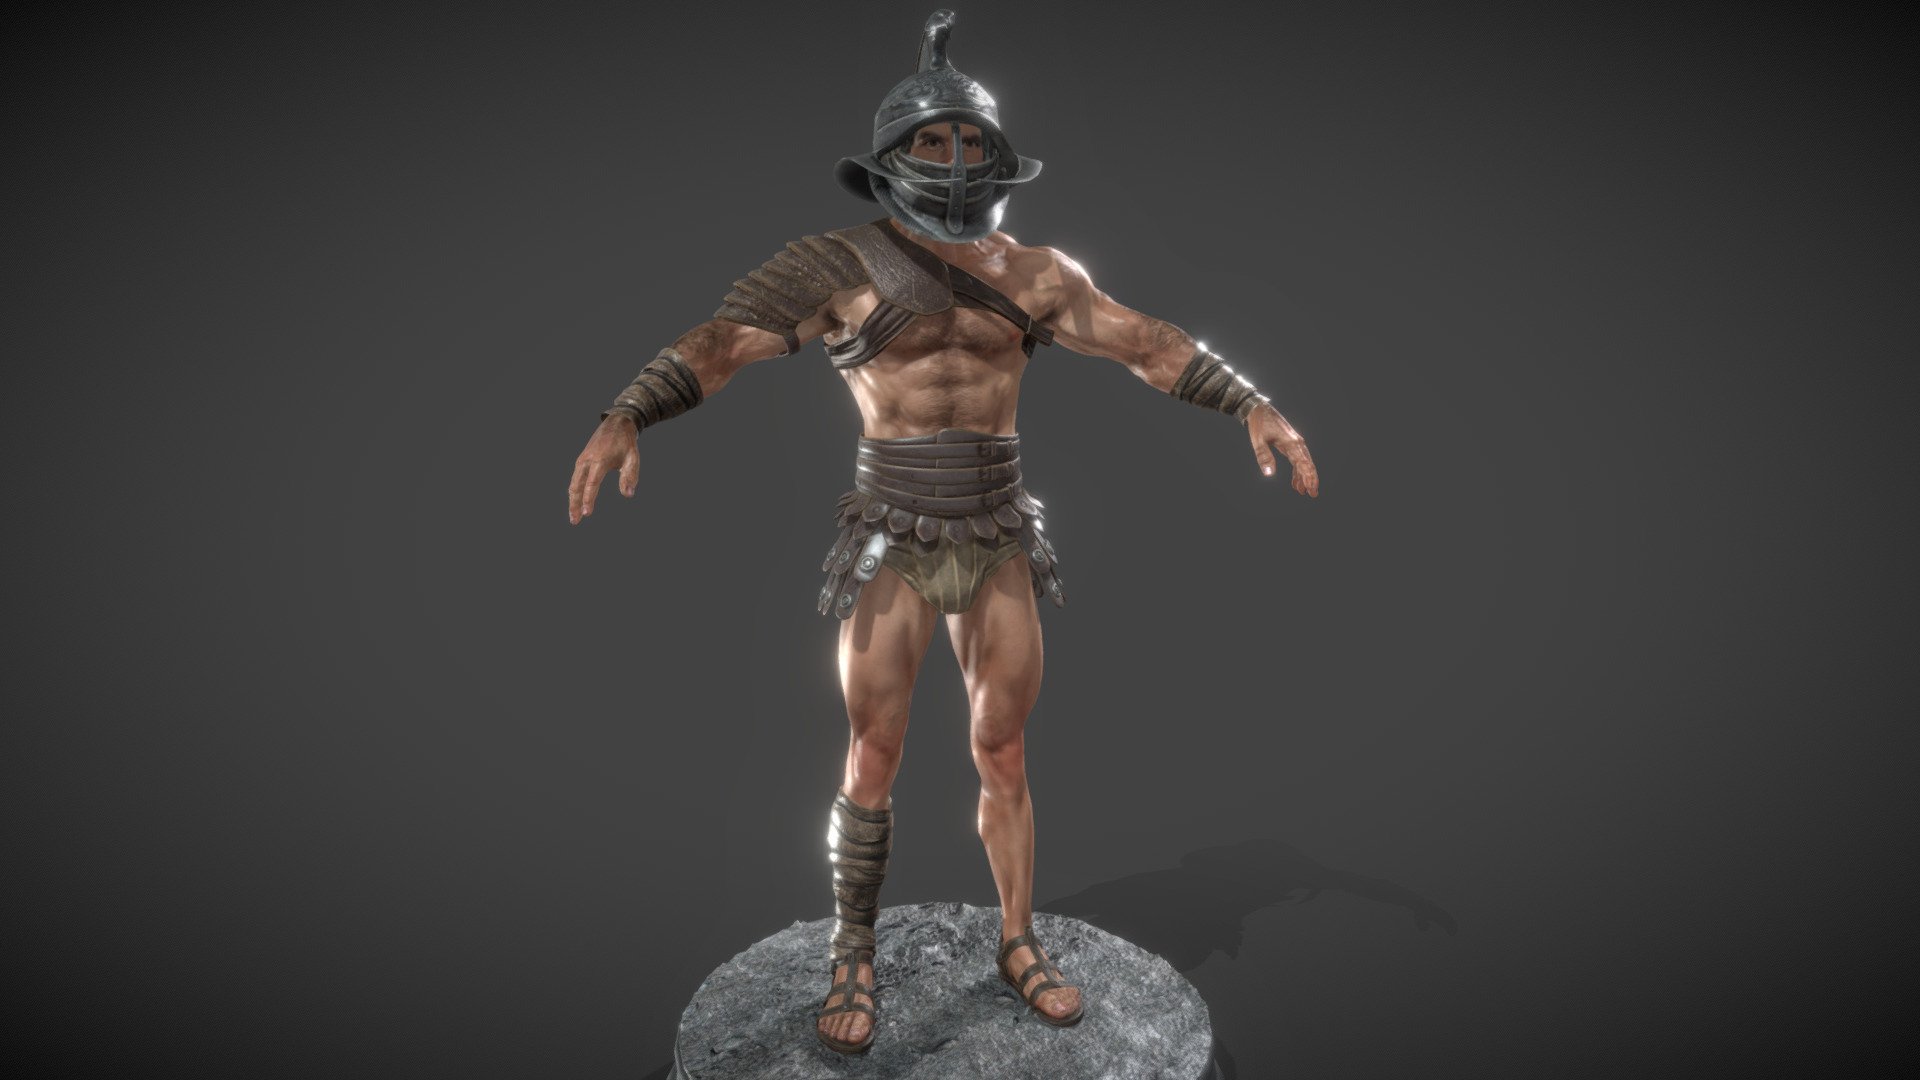 Roman Gladiator with interchangeable Armor. You can customize armor or character as you like. There is a complete weapons set.

High quality modeling and texturing for realistic renders. 2K high-detailed textures. PBR materials for physically accurate render and maximum compatibitily (ue4, unity, v-ray, arnold, etc.), perfectly skinned with bones readi to animate. Custom male body sculpted with z-brush and with handmade textures.

Ready to render and customize,enjoy!!! - Gladiator rookie - 3D model by Alessandro Giommetti (@giommo77) 3d model